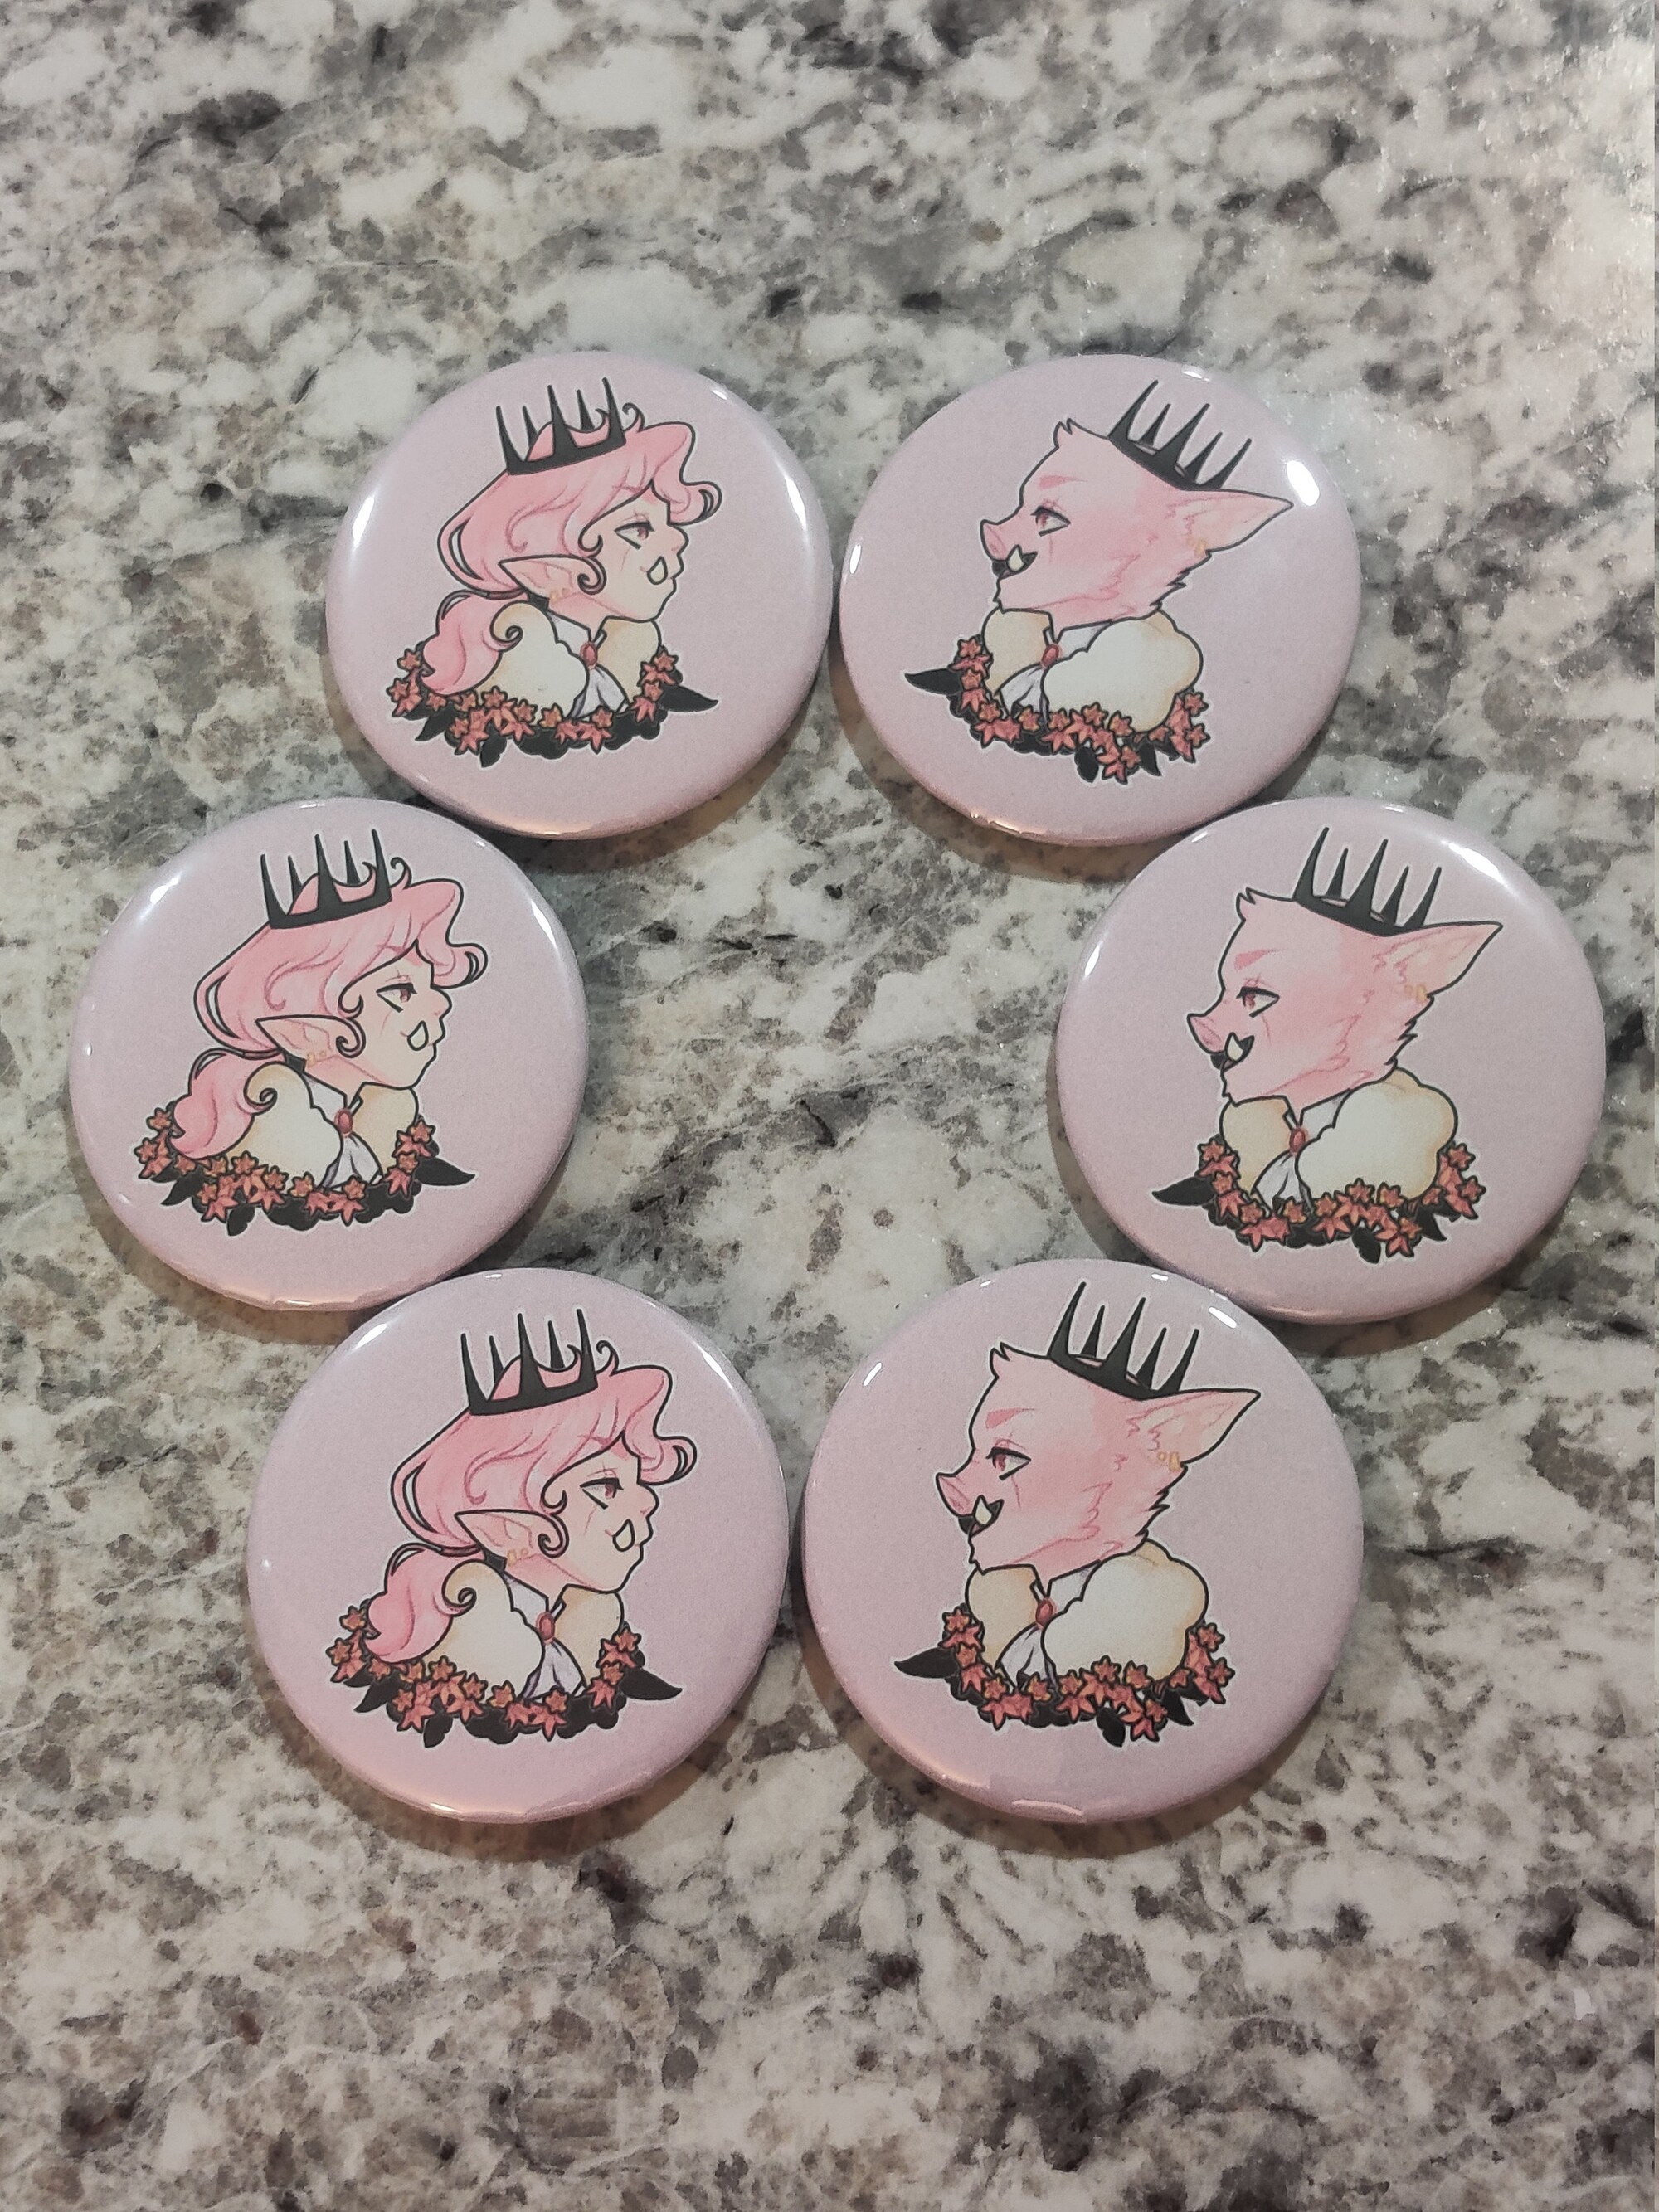 Technoblade Dream Smp Inspired Pin Buttons!